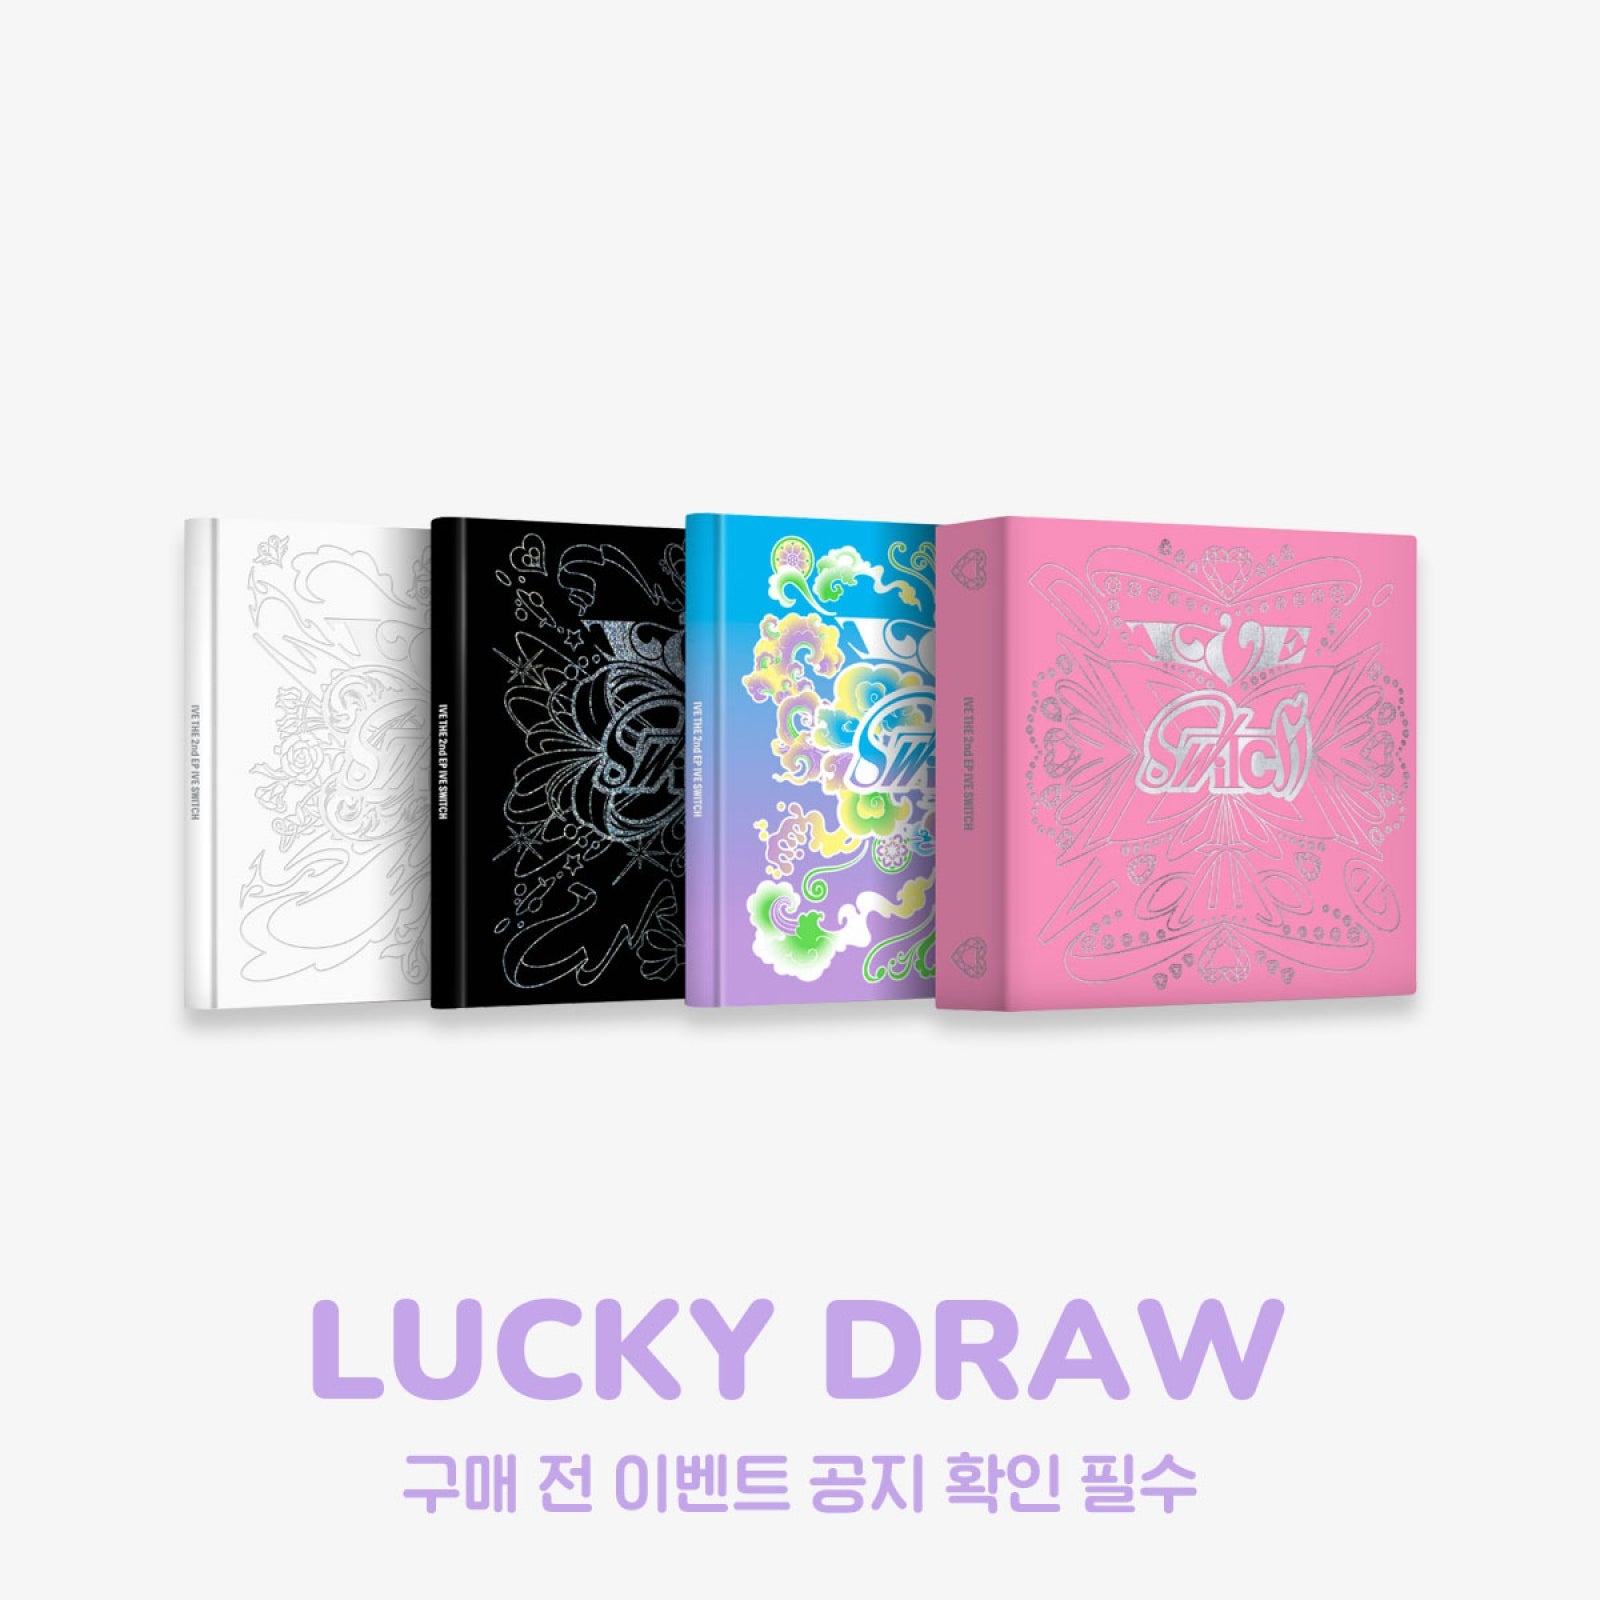 IVE - IVE SWITCH 2ND EP ALBUM LUCKY DRAW EVENT WITHMUU PHOTOBOOK RANDOM - COKODIVE